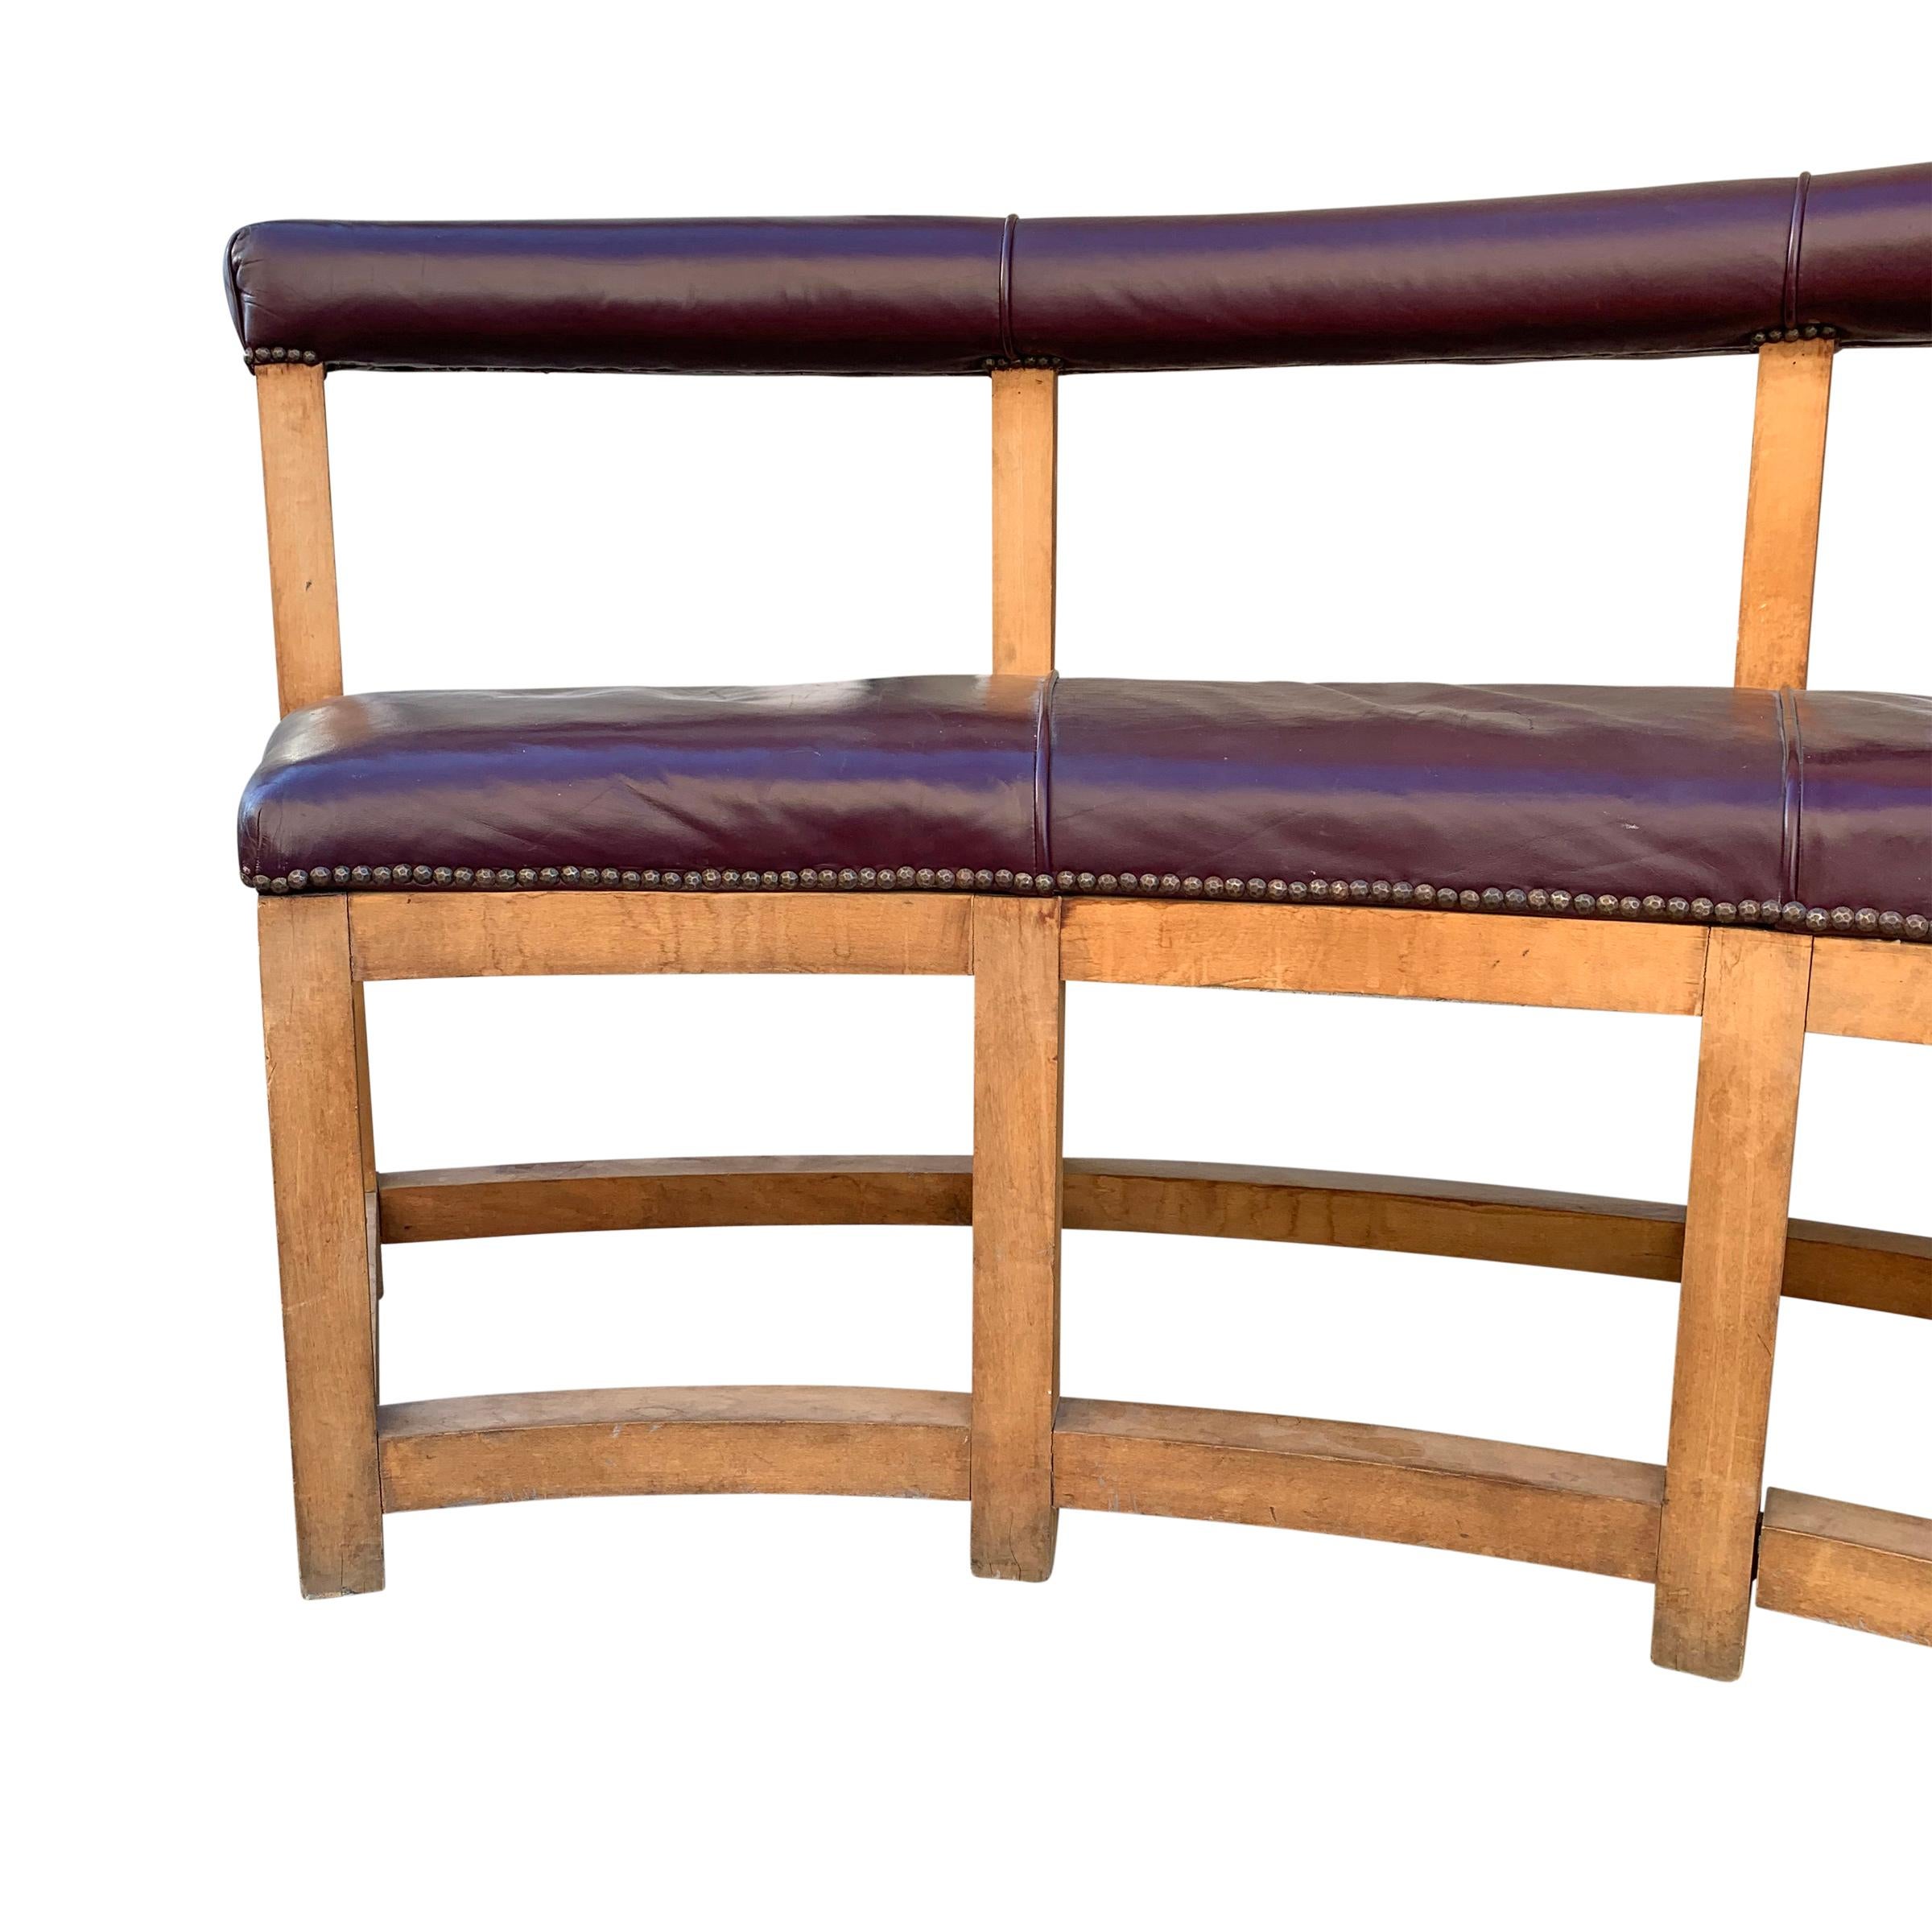 Pair of Vintage Monumental Curved Benches 1